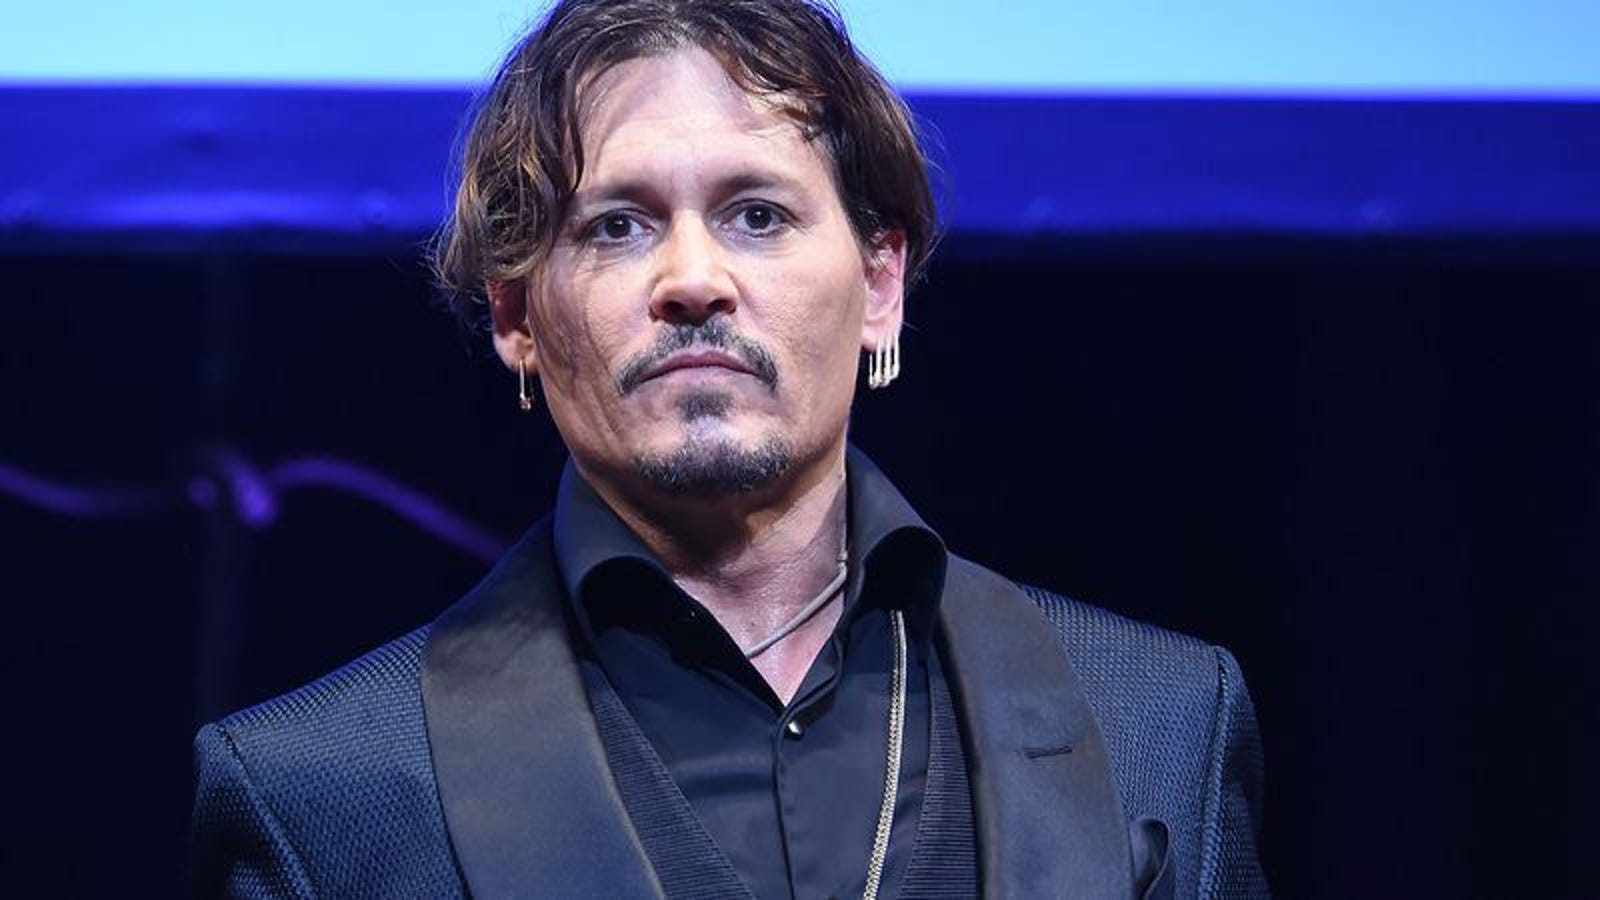 White House officially condemns Johnny Depp as “sad”